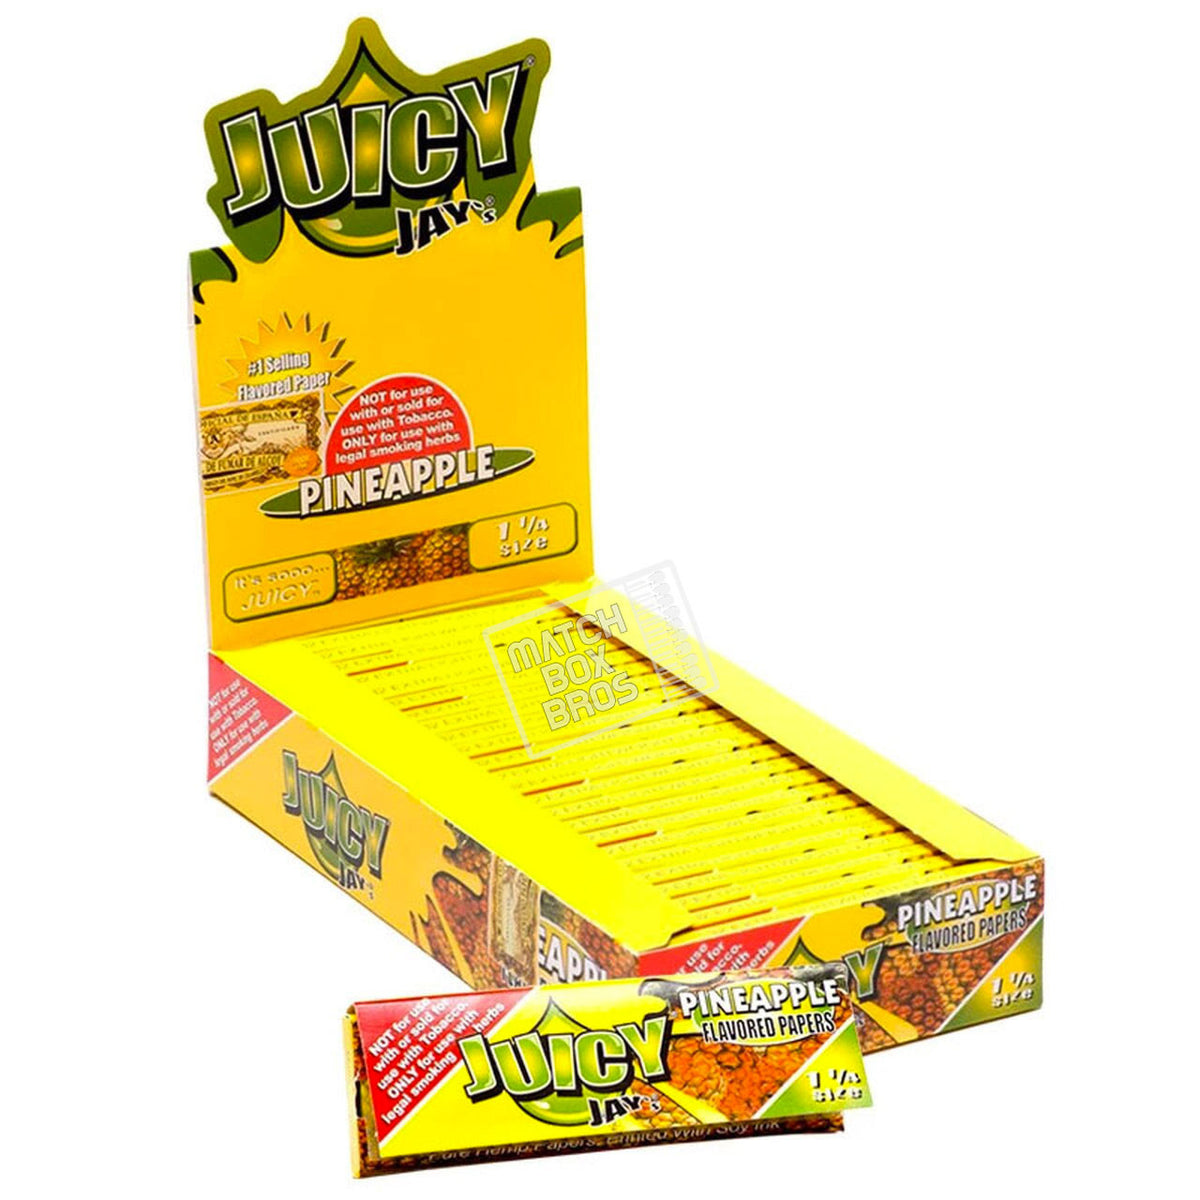 Juicy Jay's 1¼ Pineapple Flavoured Paper